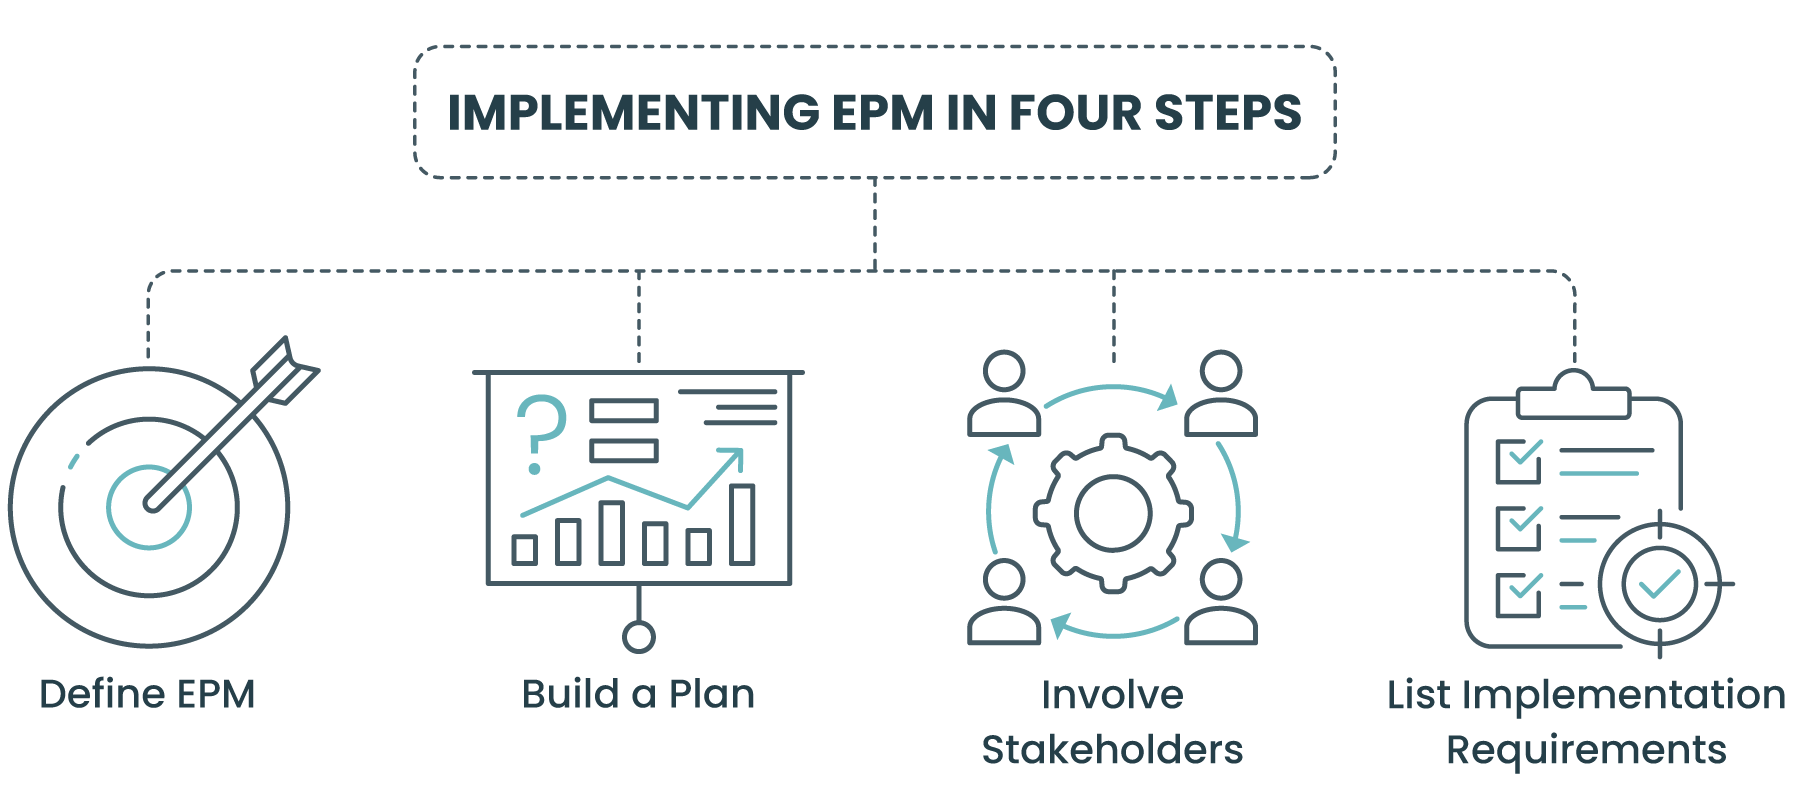 Implementing EPM in Four Steps